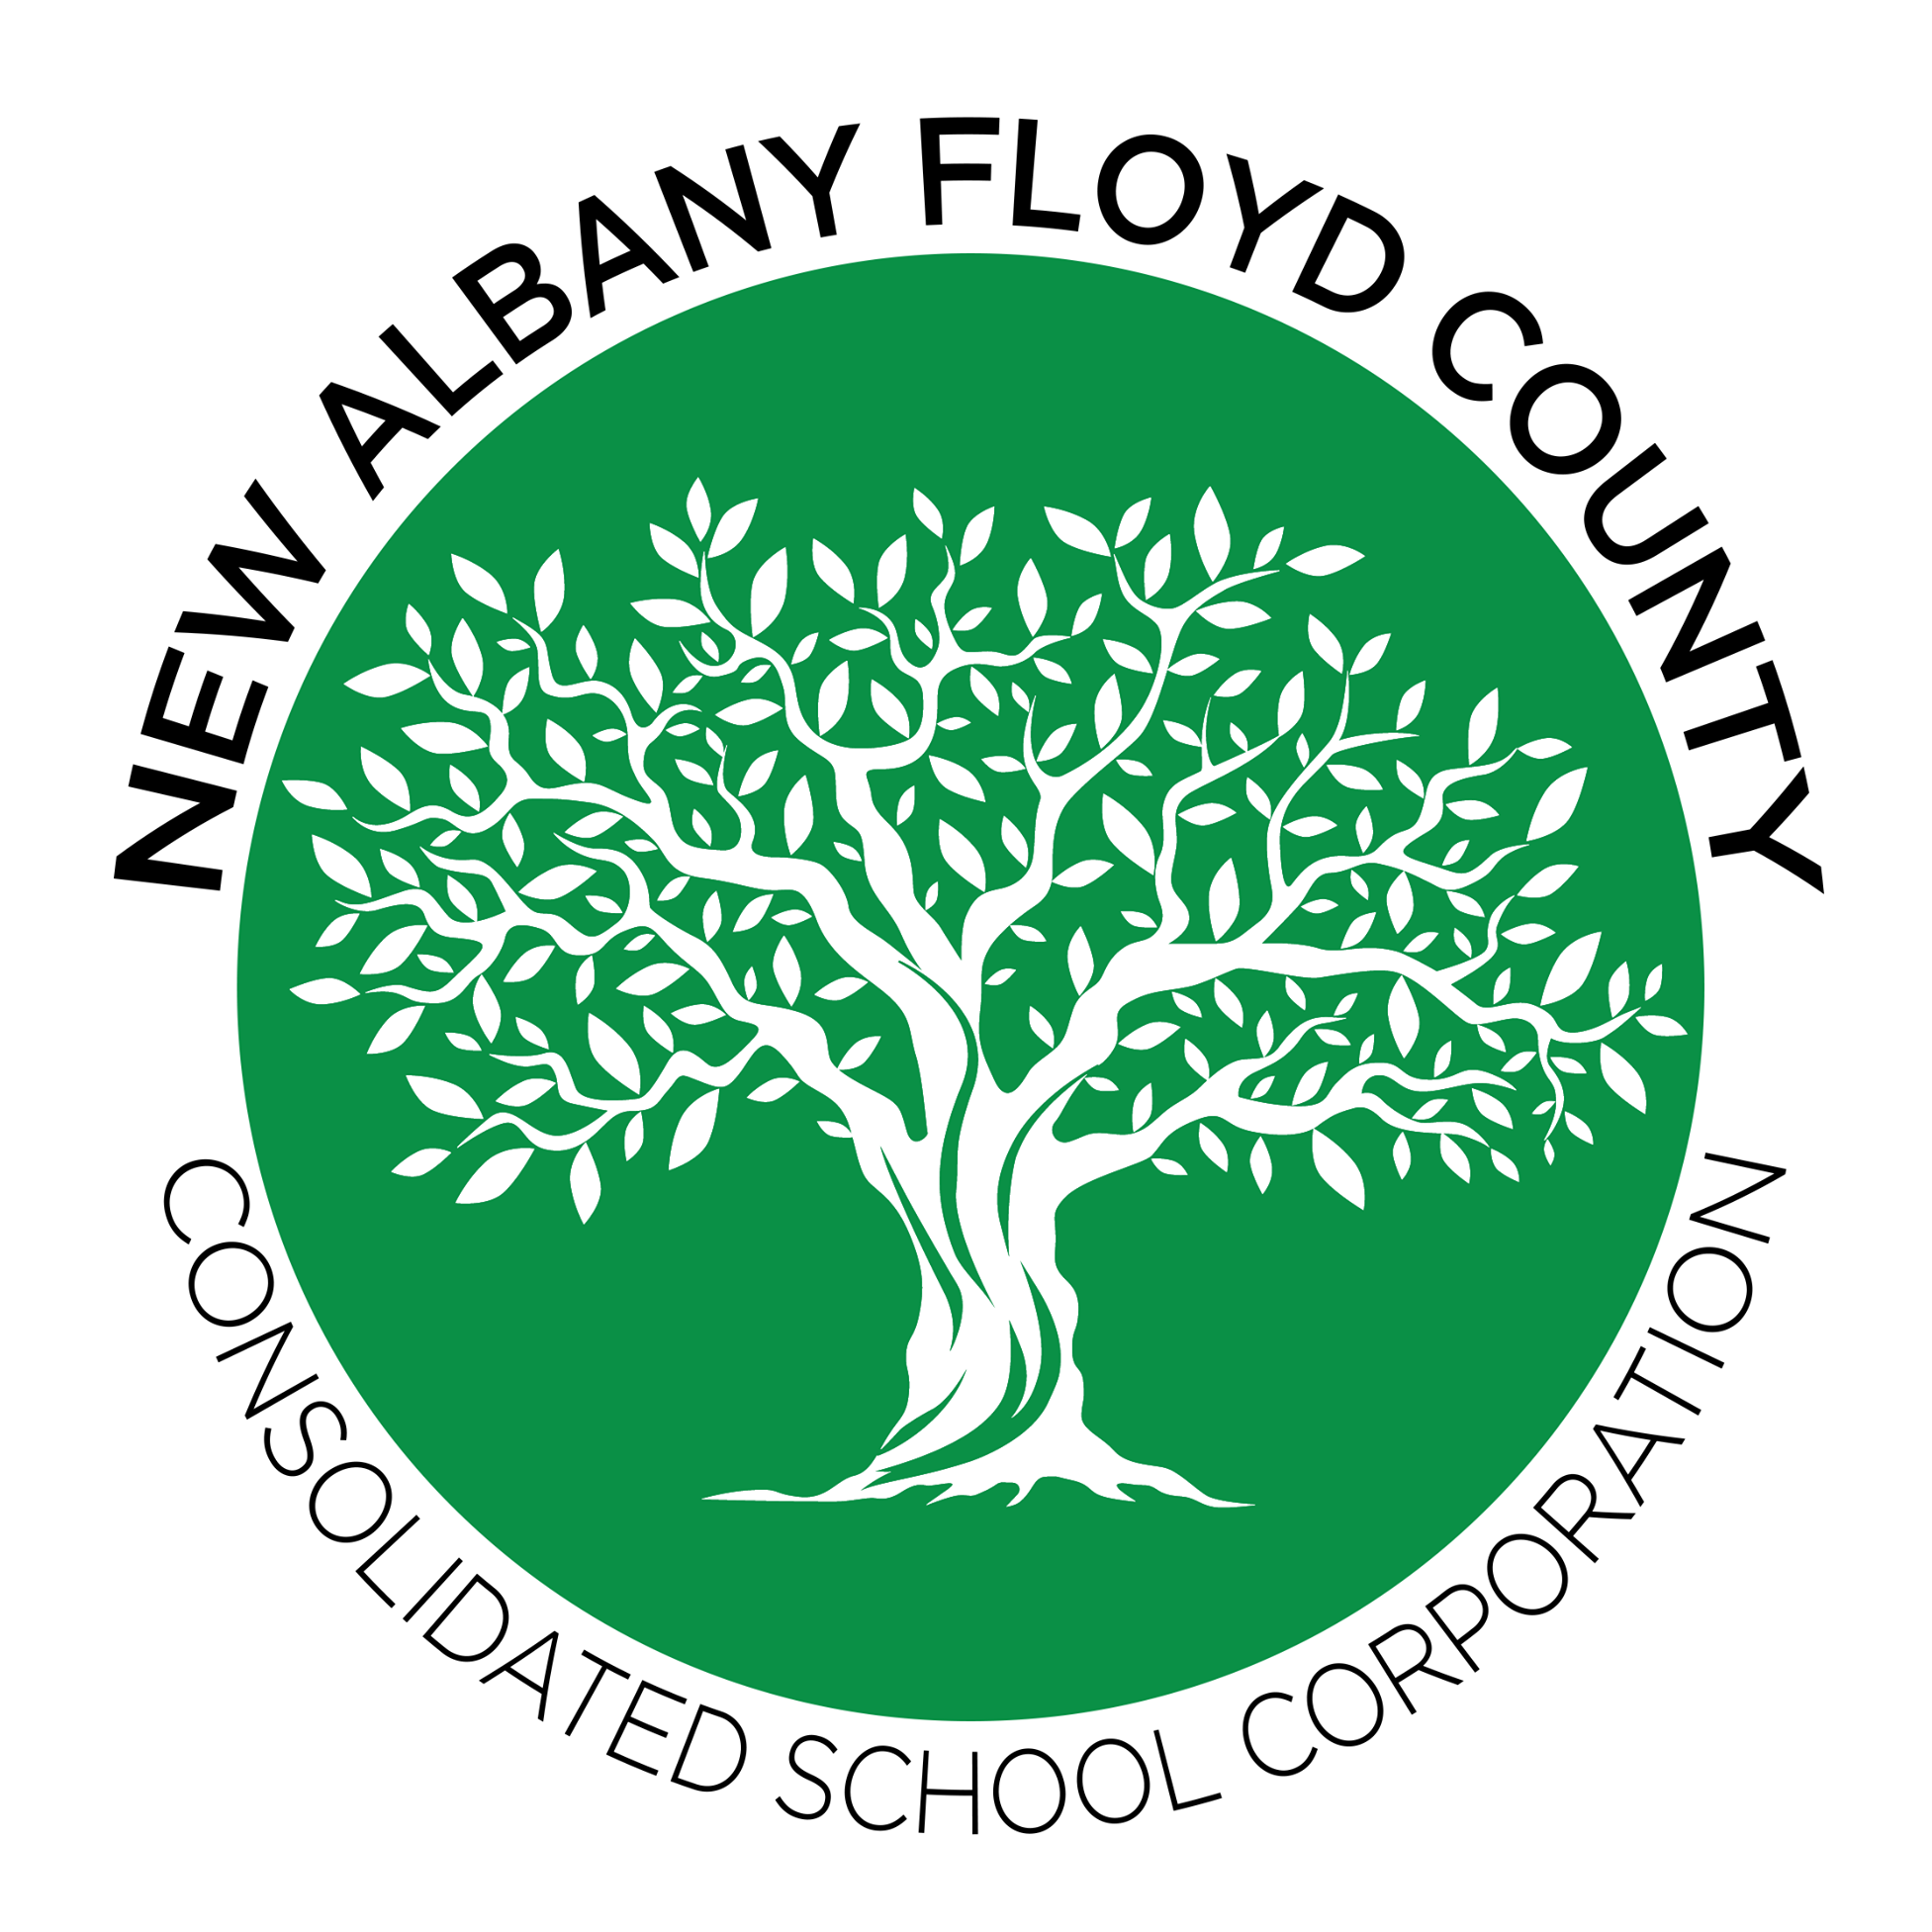 New Albany Floyd County Consolidated School Corporation